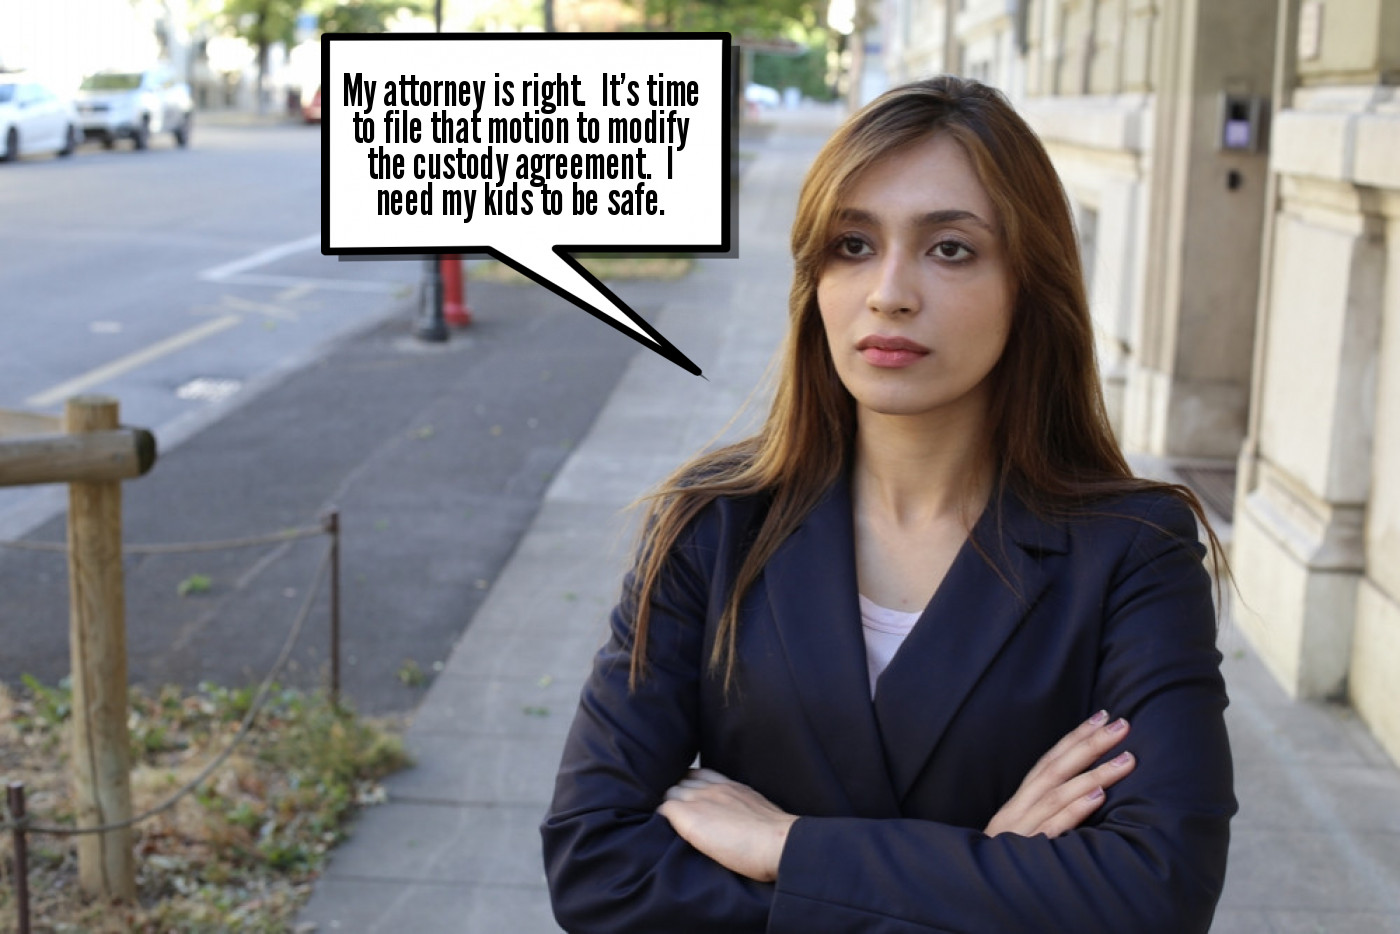 A woman in a suit standing on a sidewalk with a speech bubble.